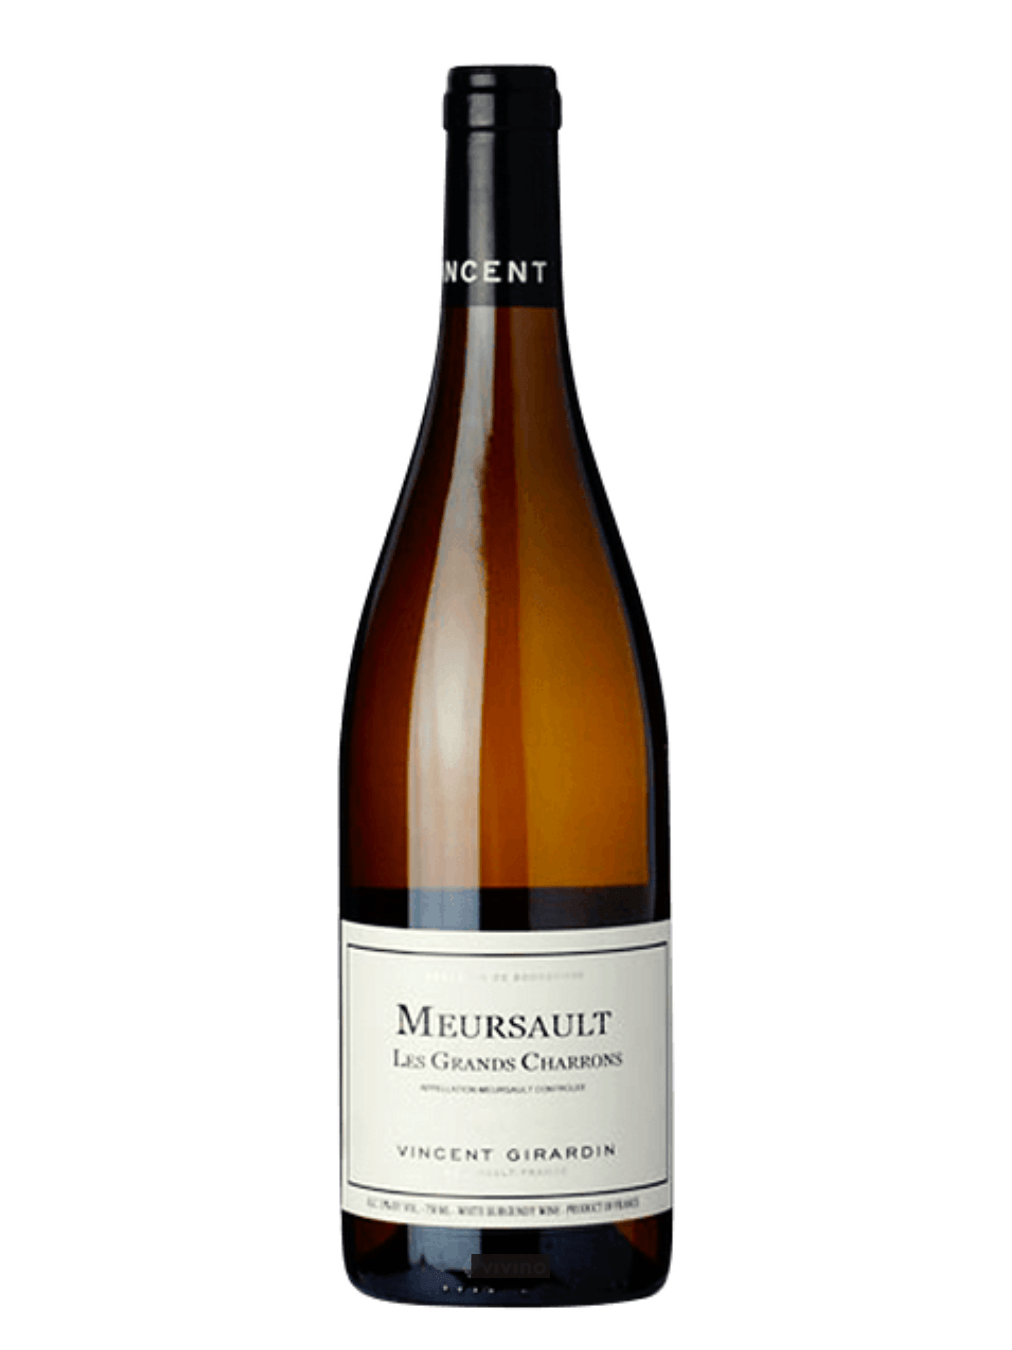 Shop Vincent Girardin Vincent Girardin Meursault Les Charrons 2017 online at PENTICTON artisanal French wine store in Hong Kong. Discover other French wines, promotions, workshops and featured offers at pentictonpacific.com 